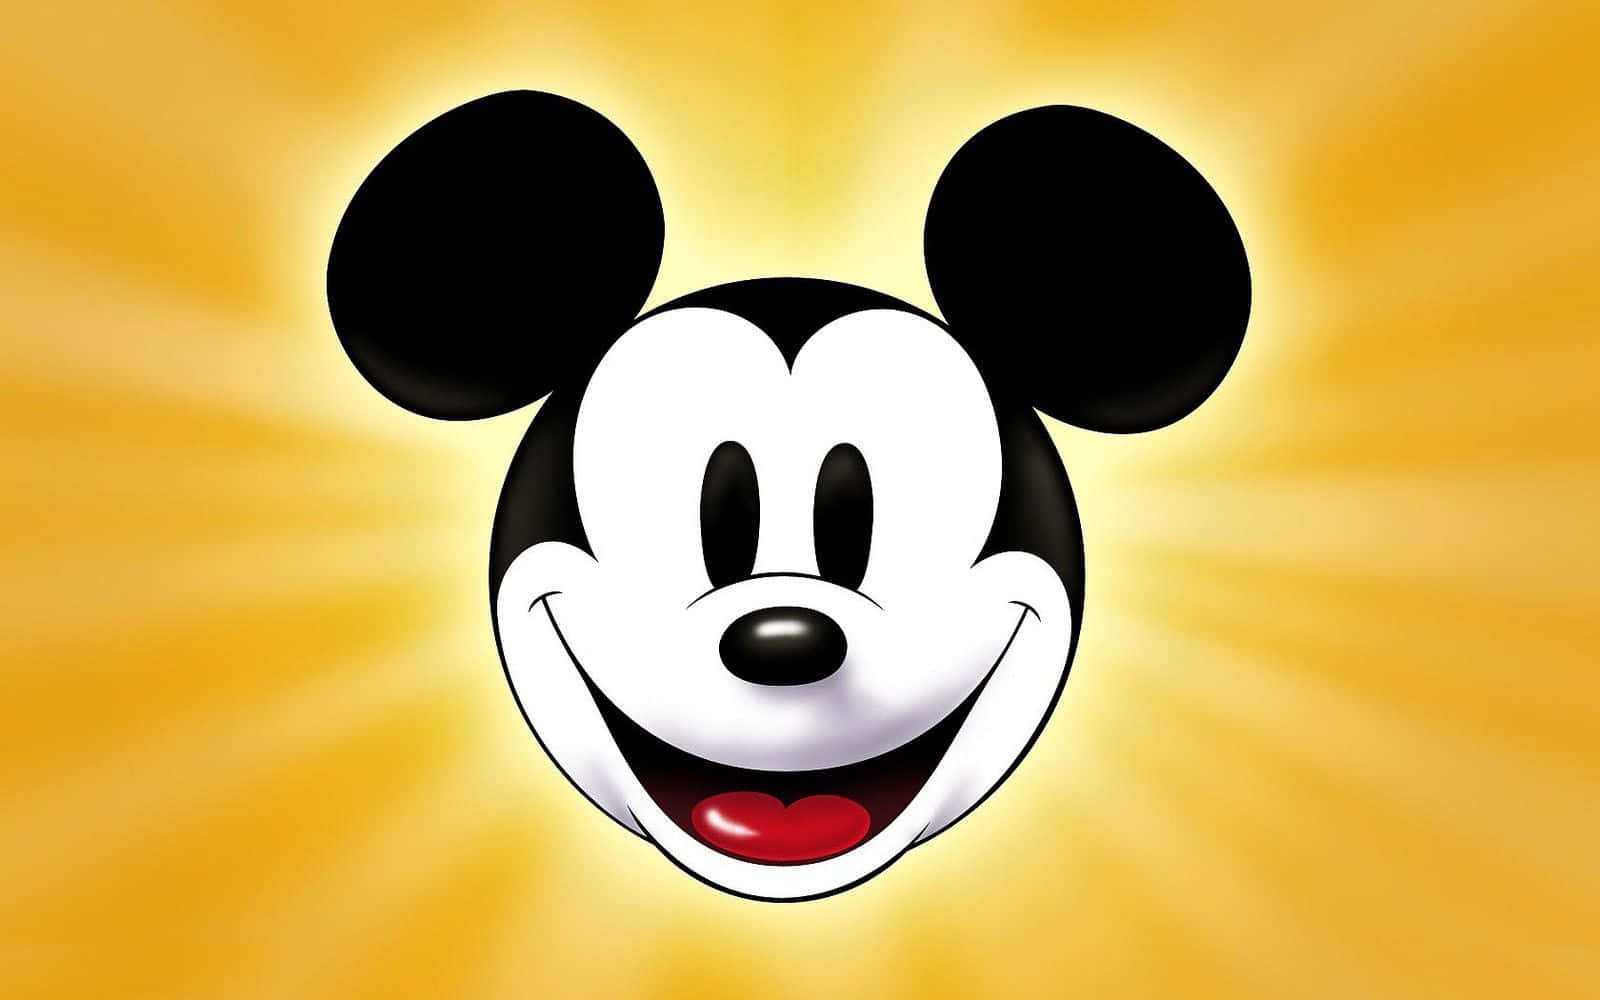 100+] Cute Mickey Mouse Wallpapers | Wallpapers.com